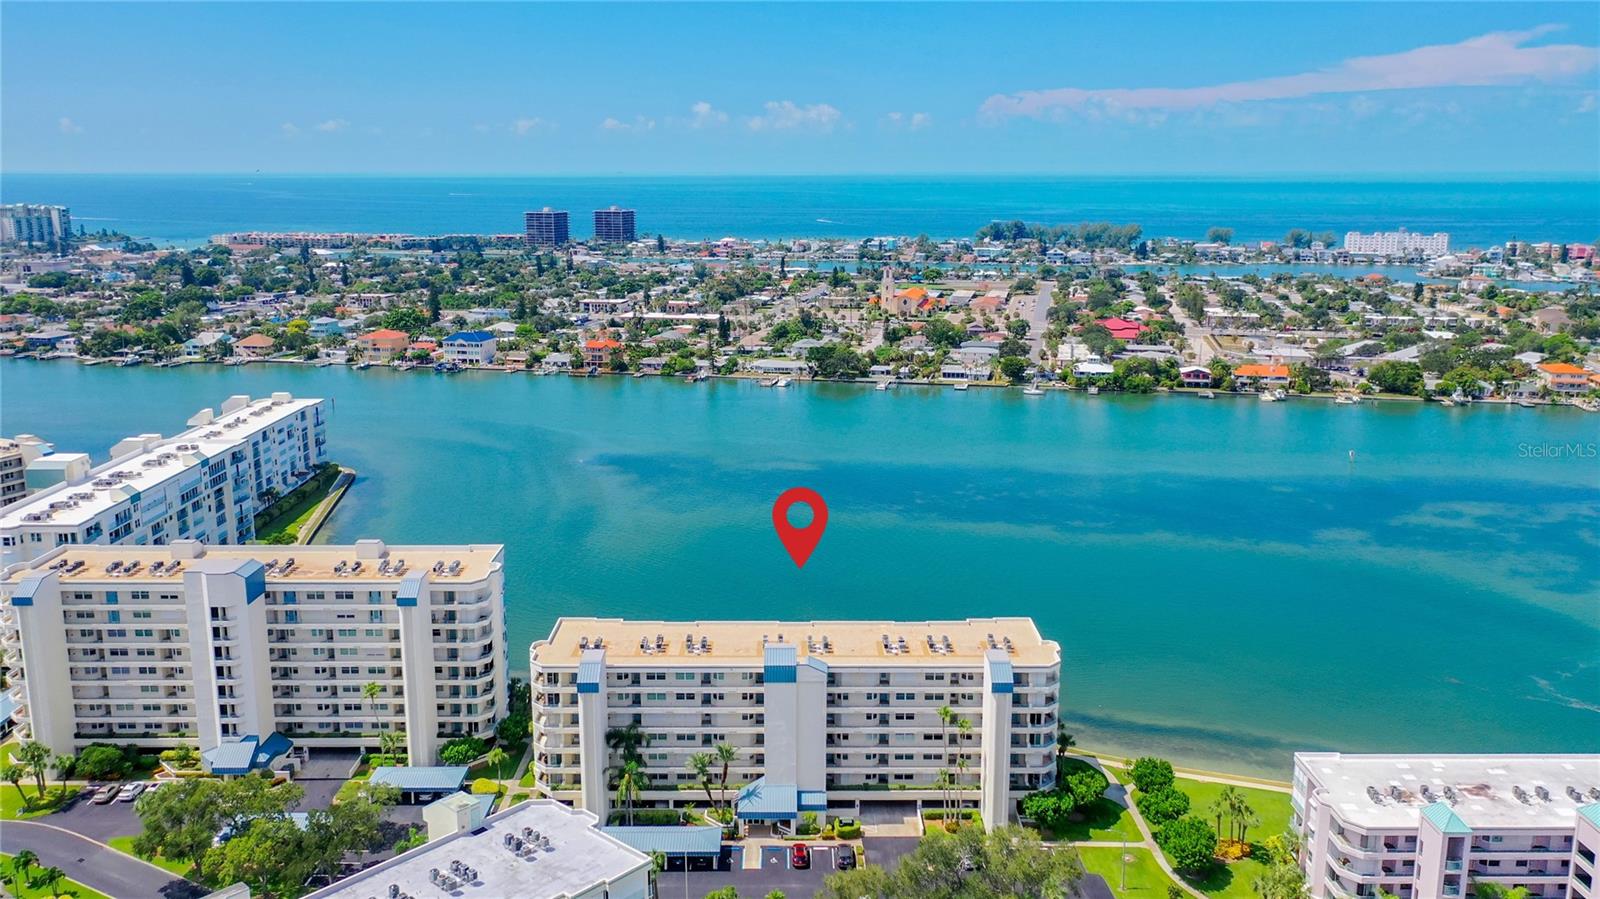 Don't miss the opportunity to own an updated 1145 sq ft condo with water views both in the back of the condo and the front